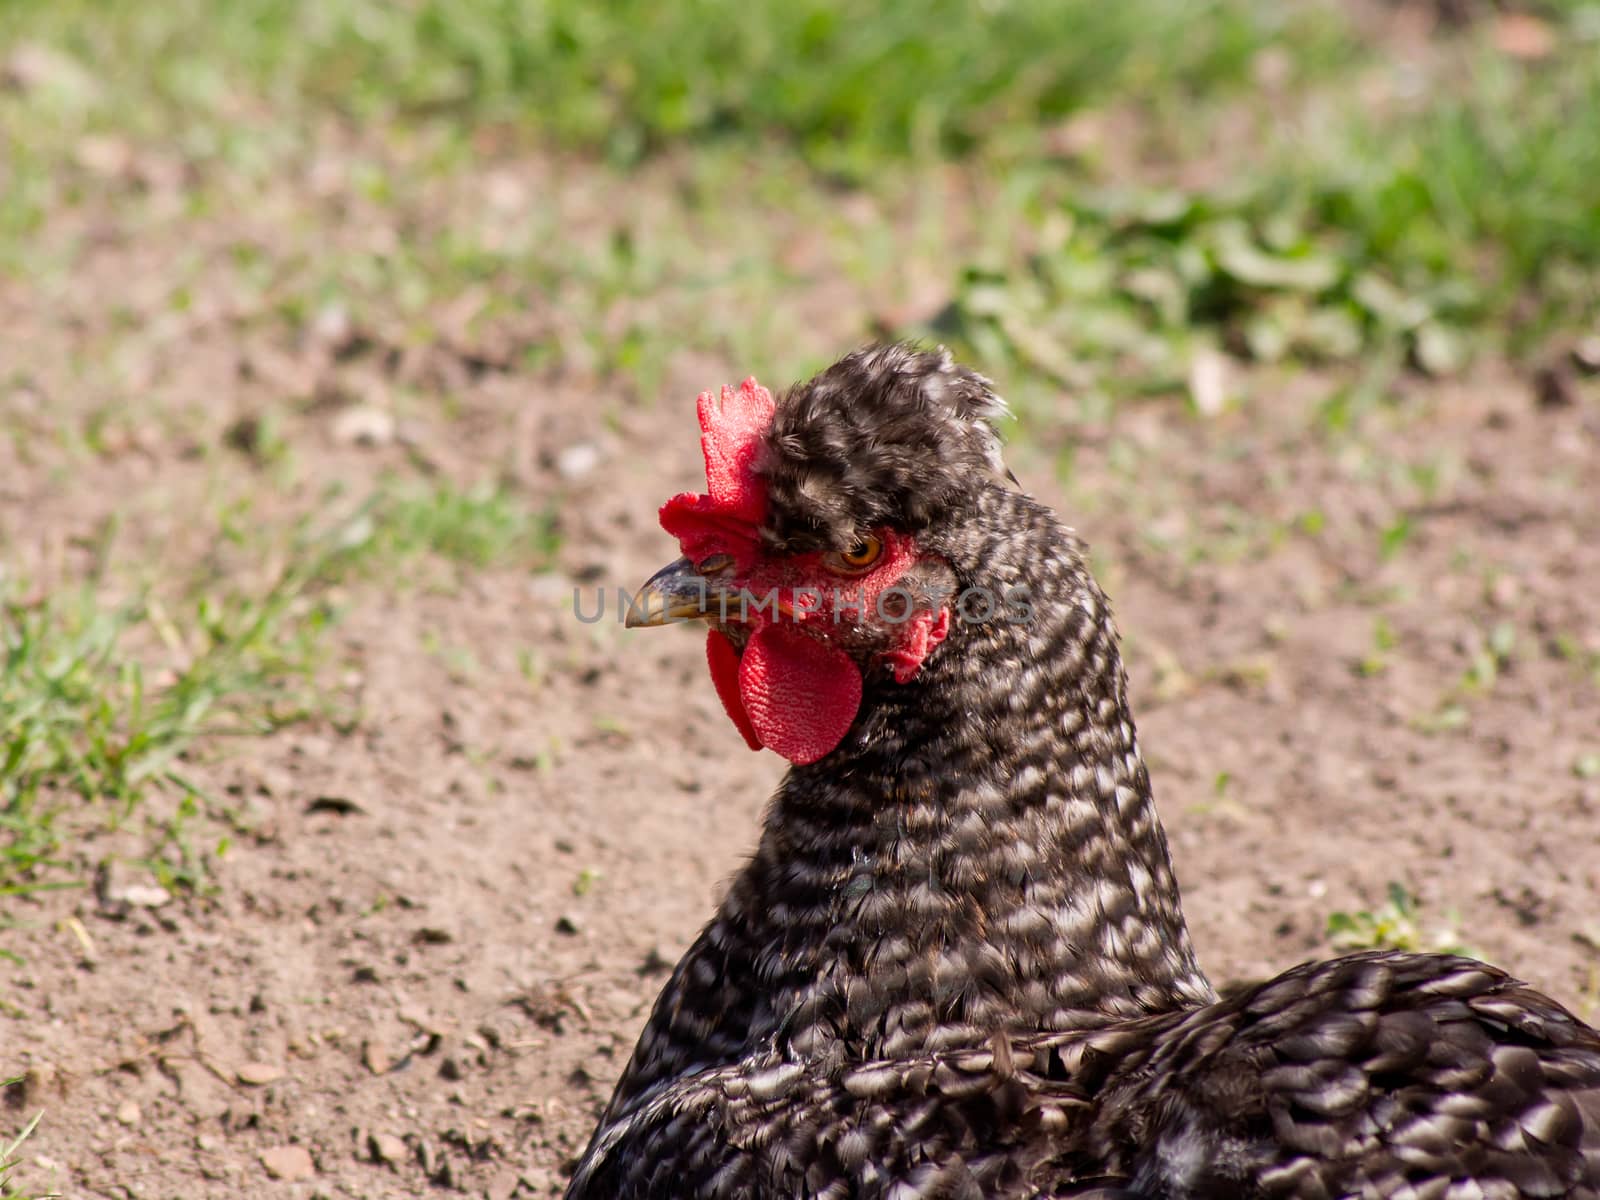 The Tufted hen. by dadalia